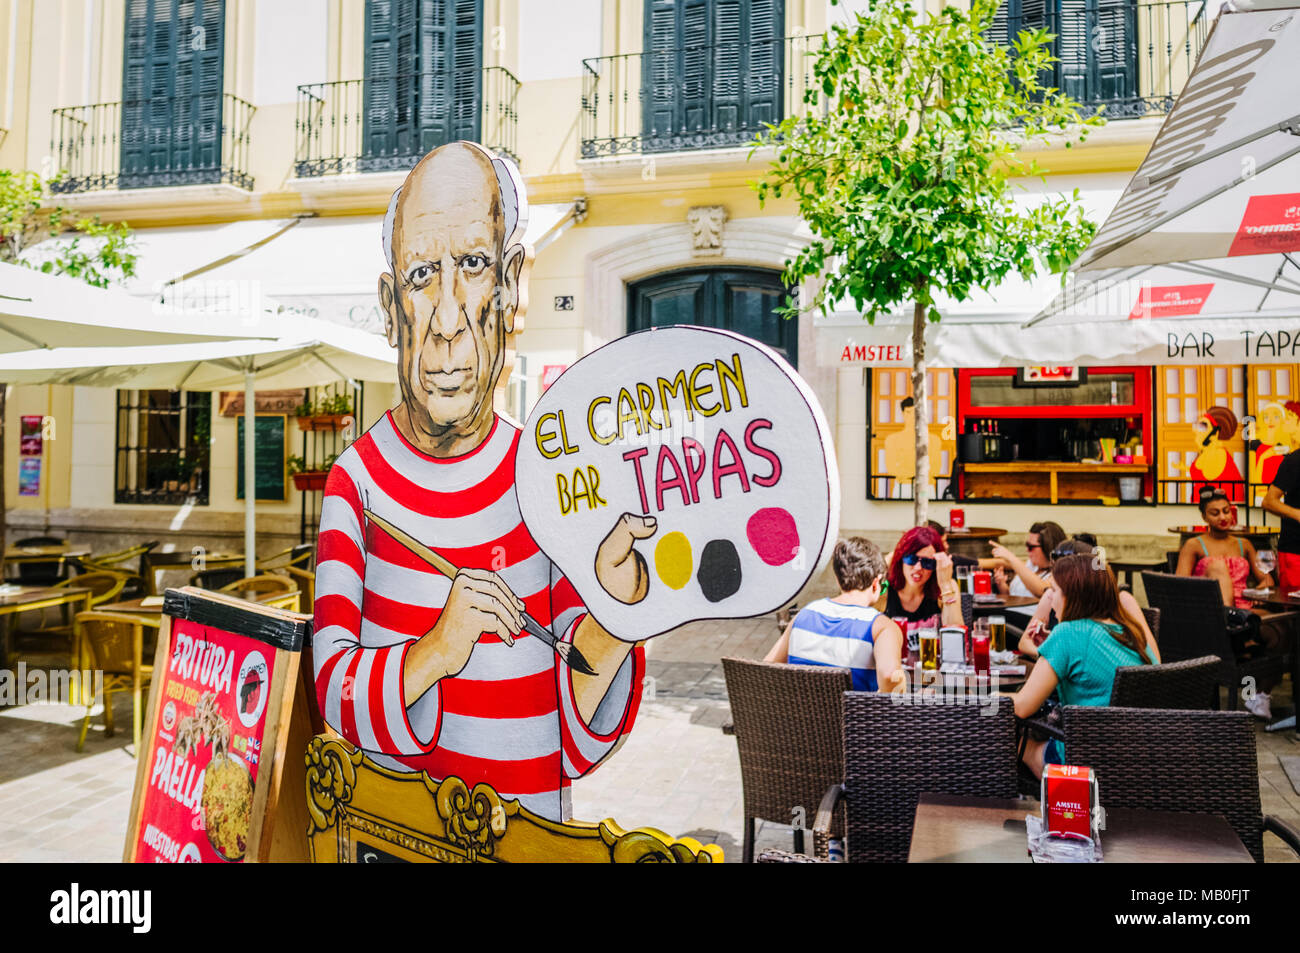 Malaga, Andalusia, Spain :  Young women at an outdoors tapas bar in Plaza del Carmen square with Pablo Picasso sign in foreground. Stock Photo